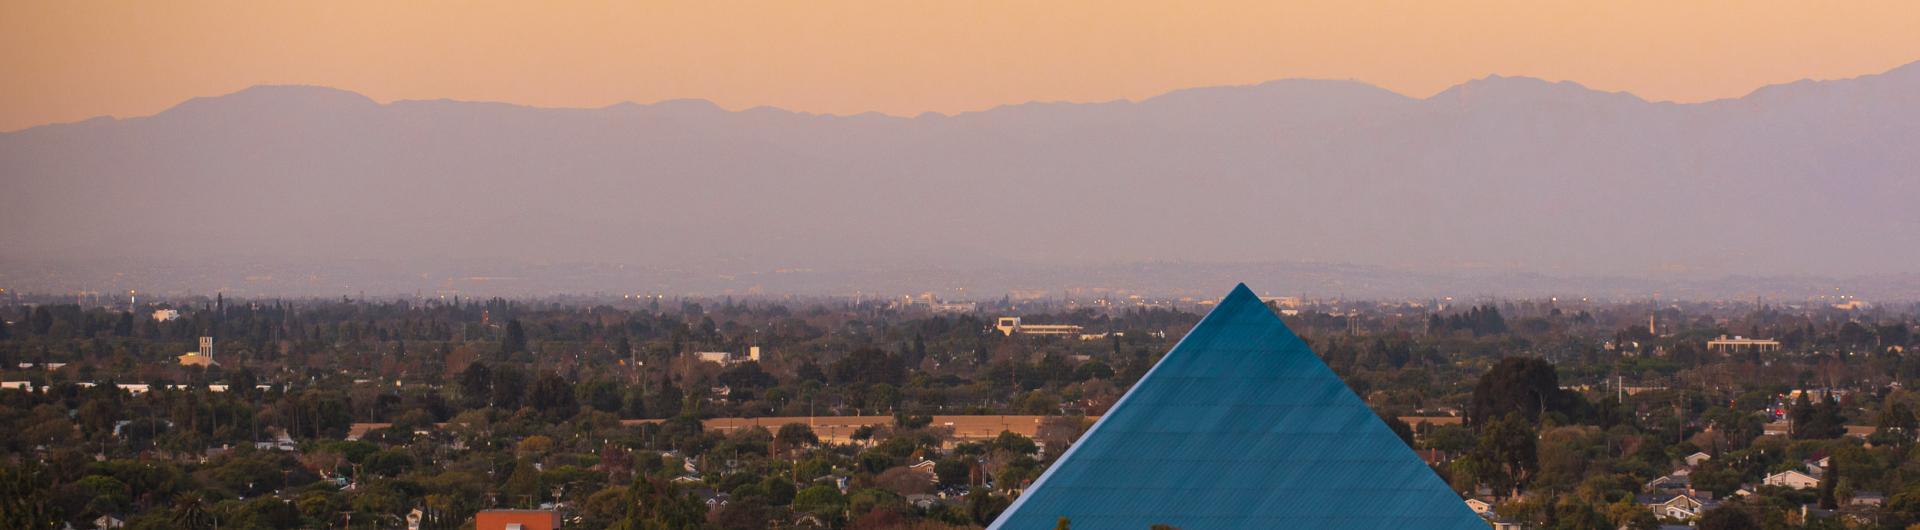 Image of CSULB campus at sunset